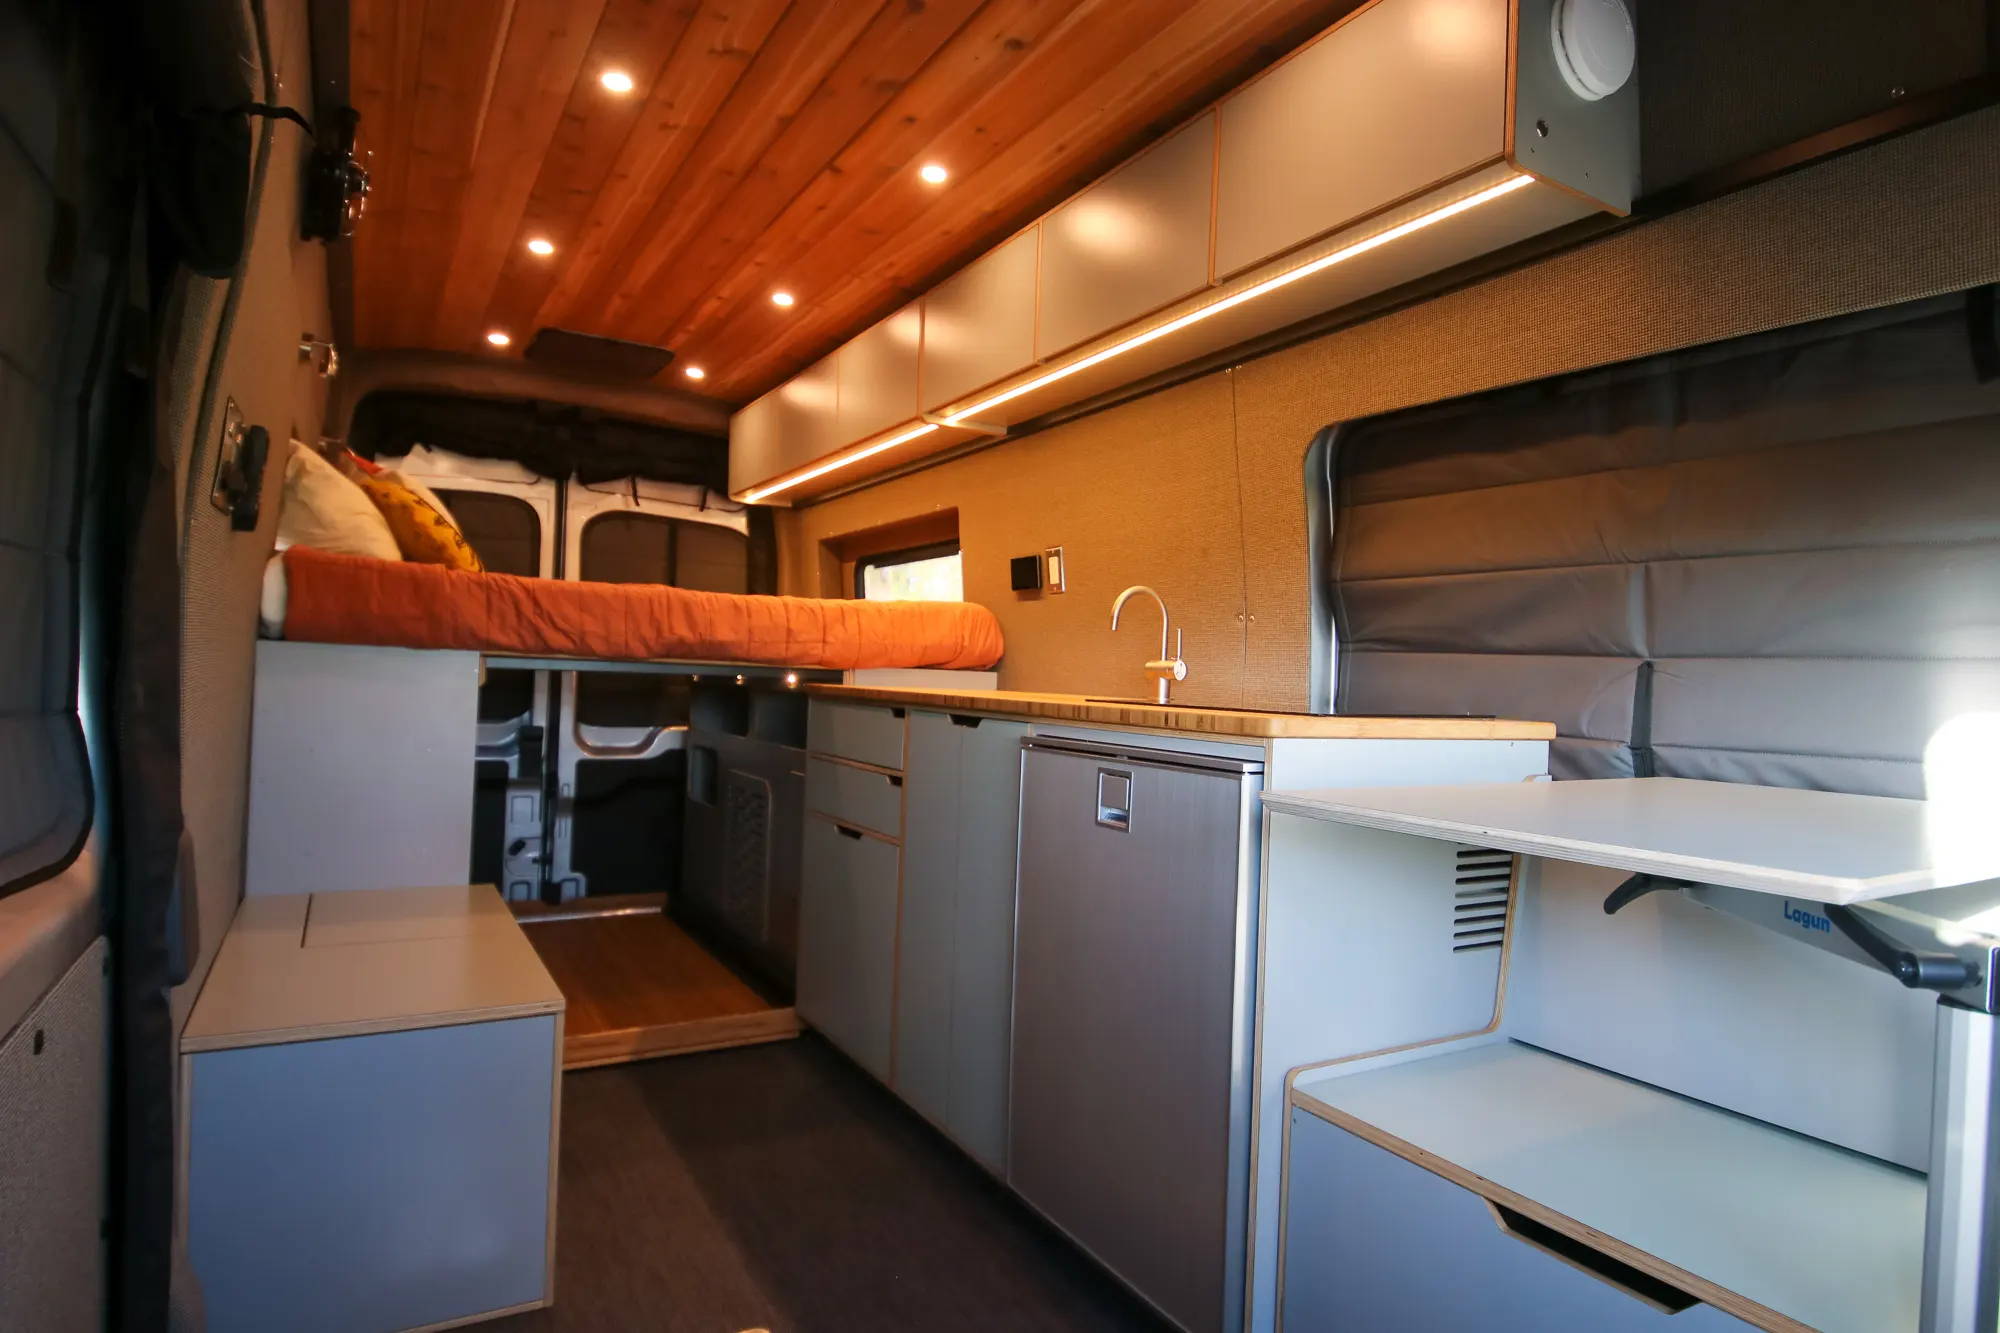 Interior View of Ford Transit Luxury Conversion Van by The Vansmith